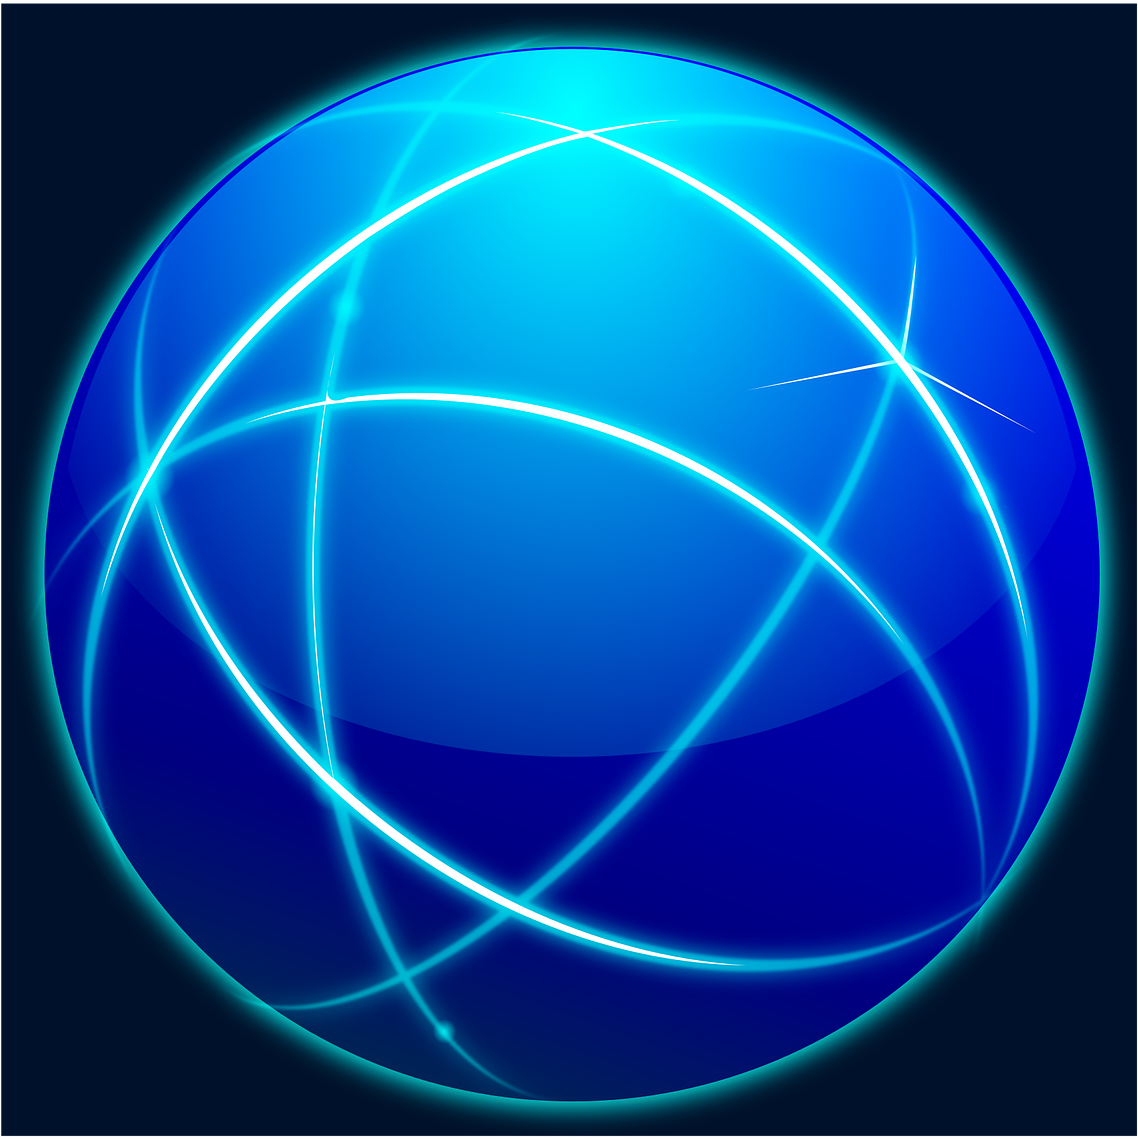 A Blue Sphere With White Lines